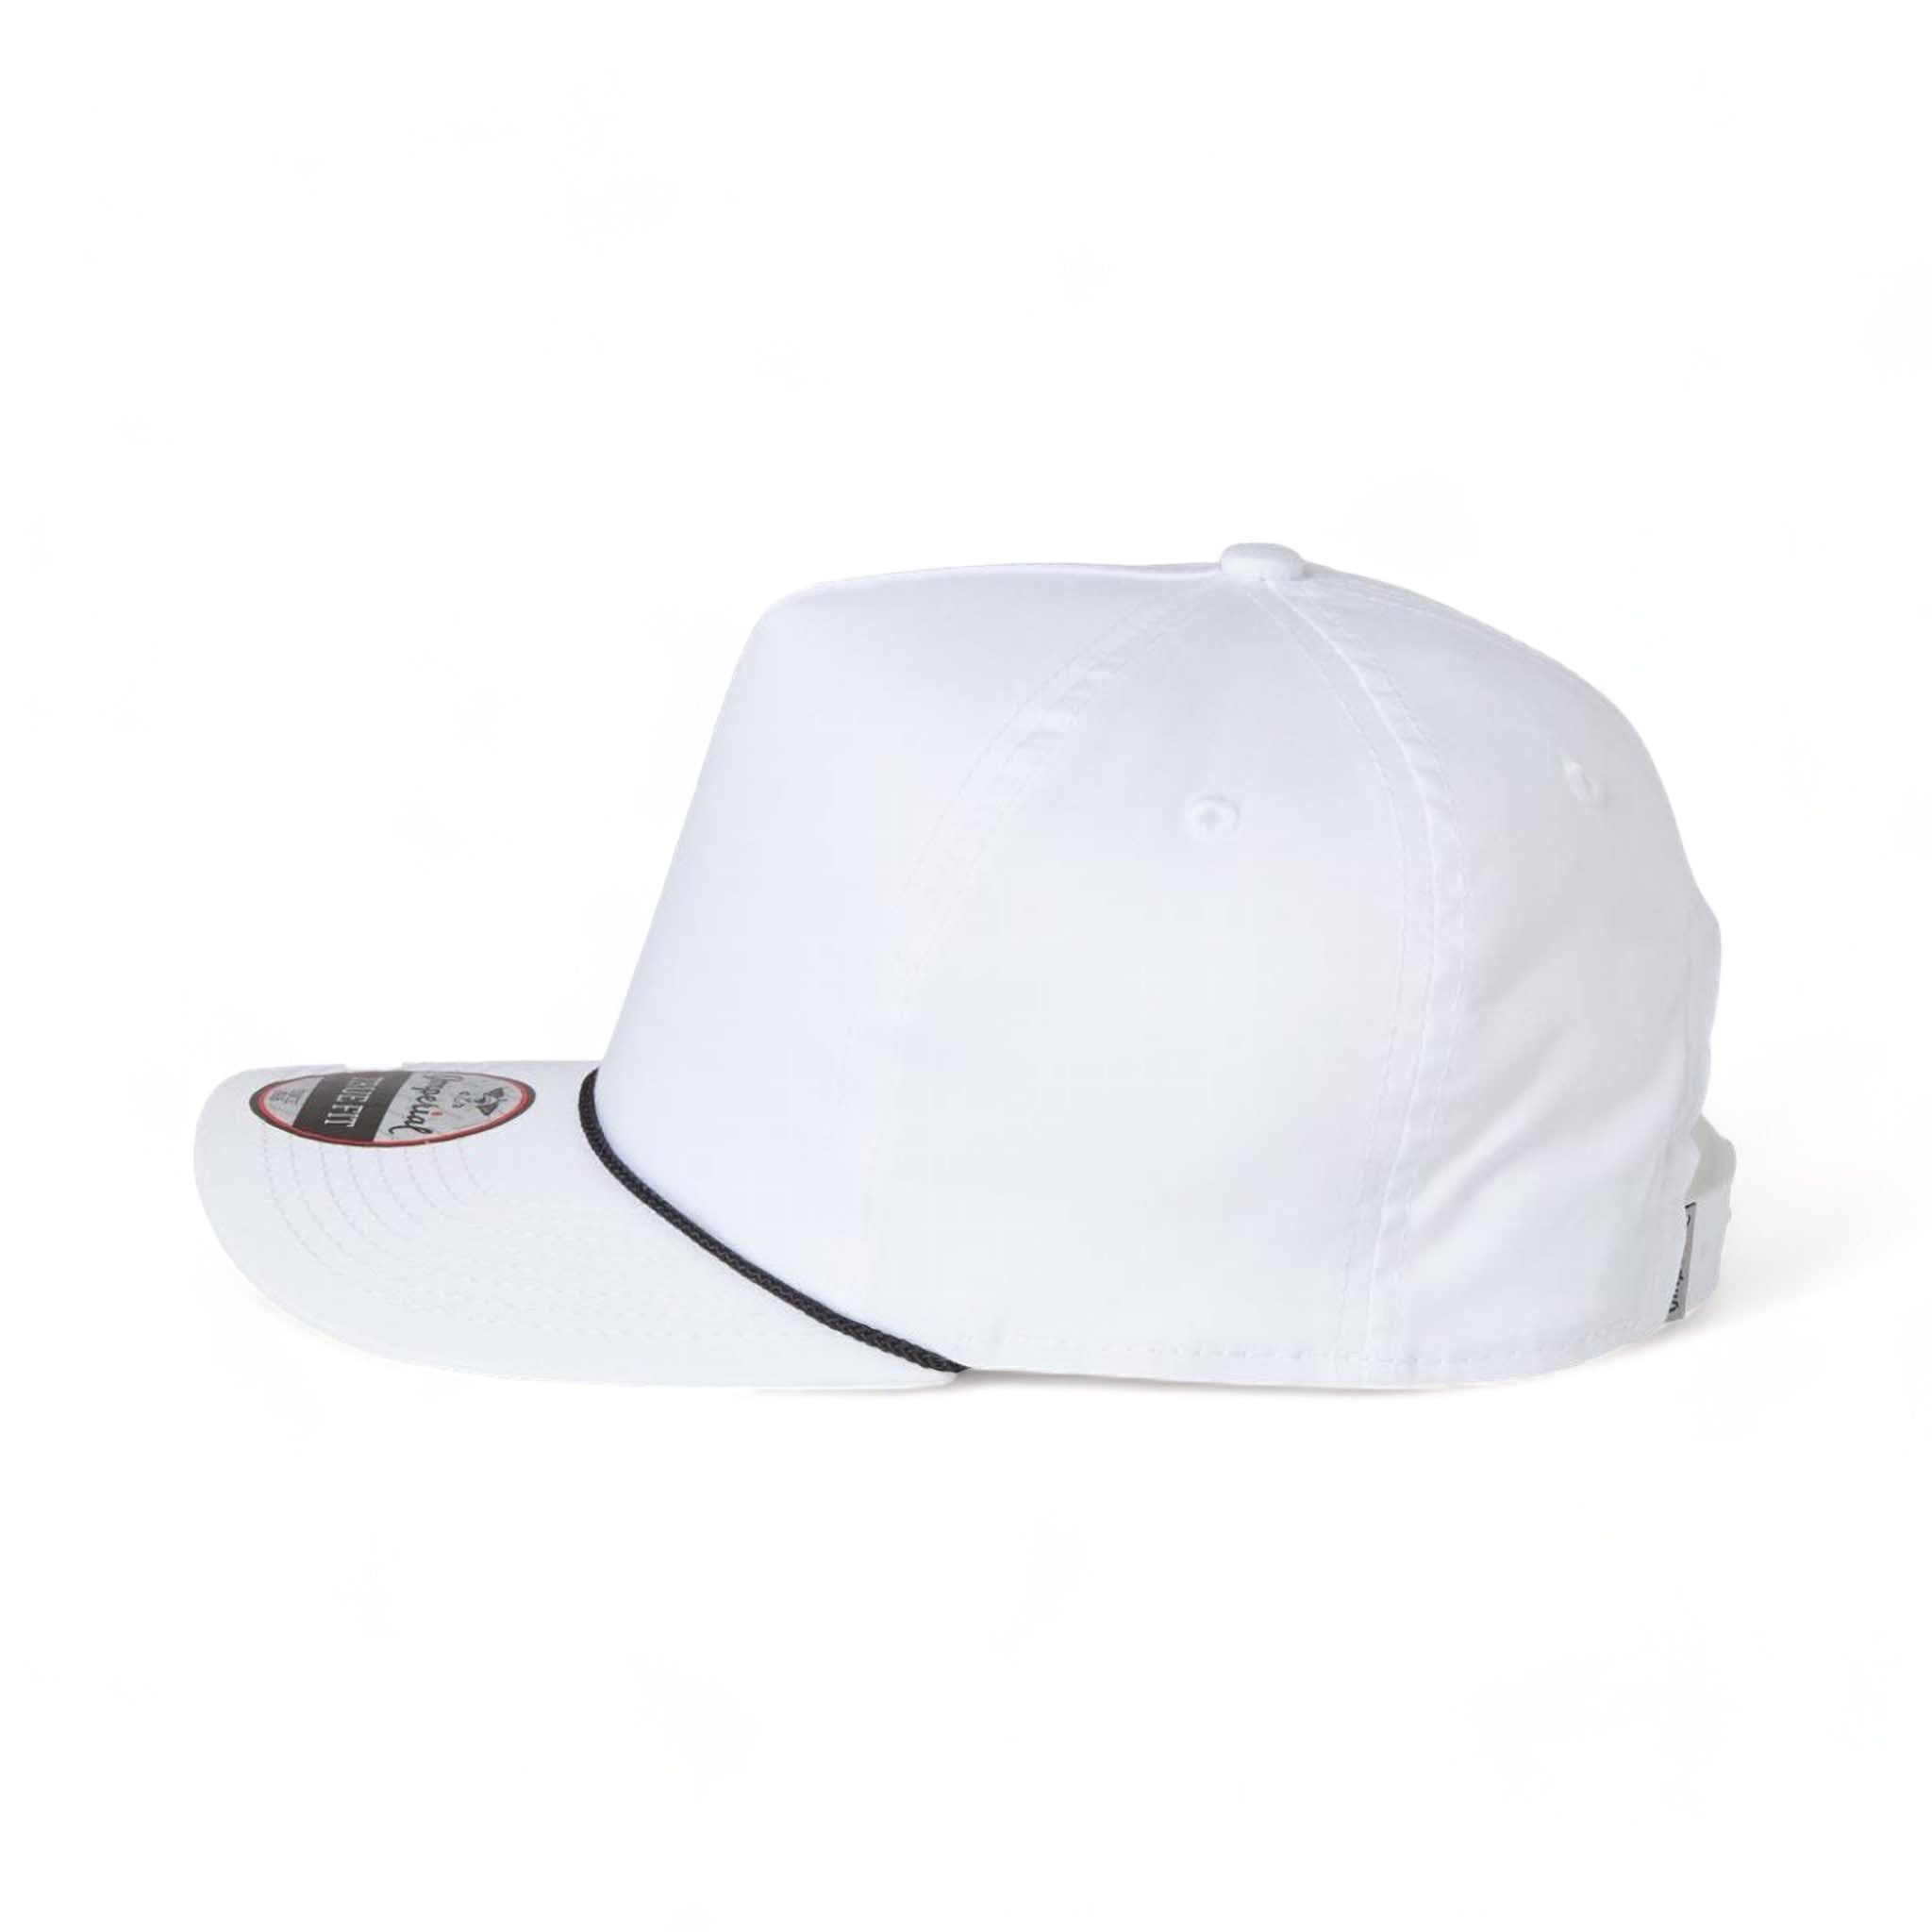 Side view of Imperial 5056 custom hat in white and black